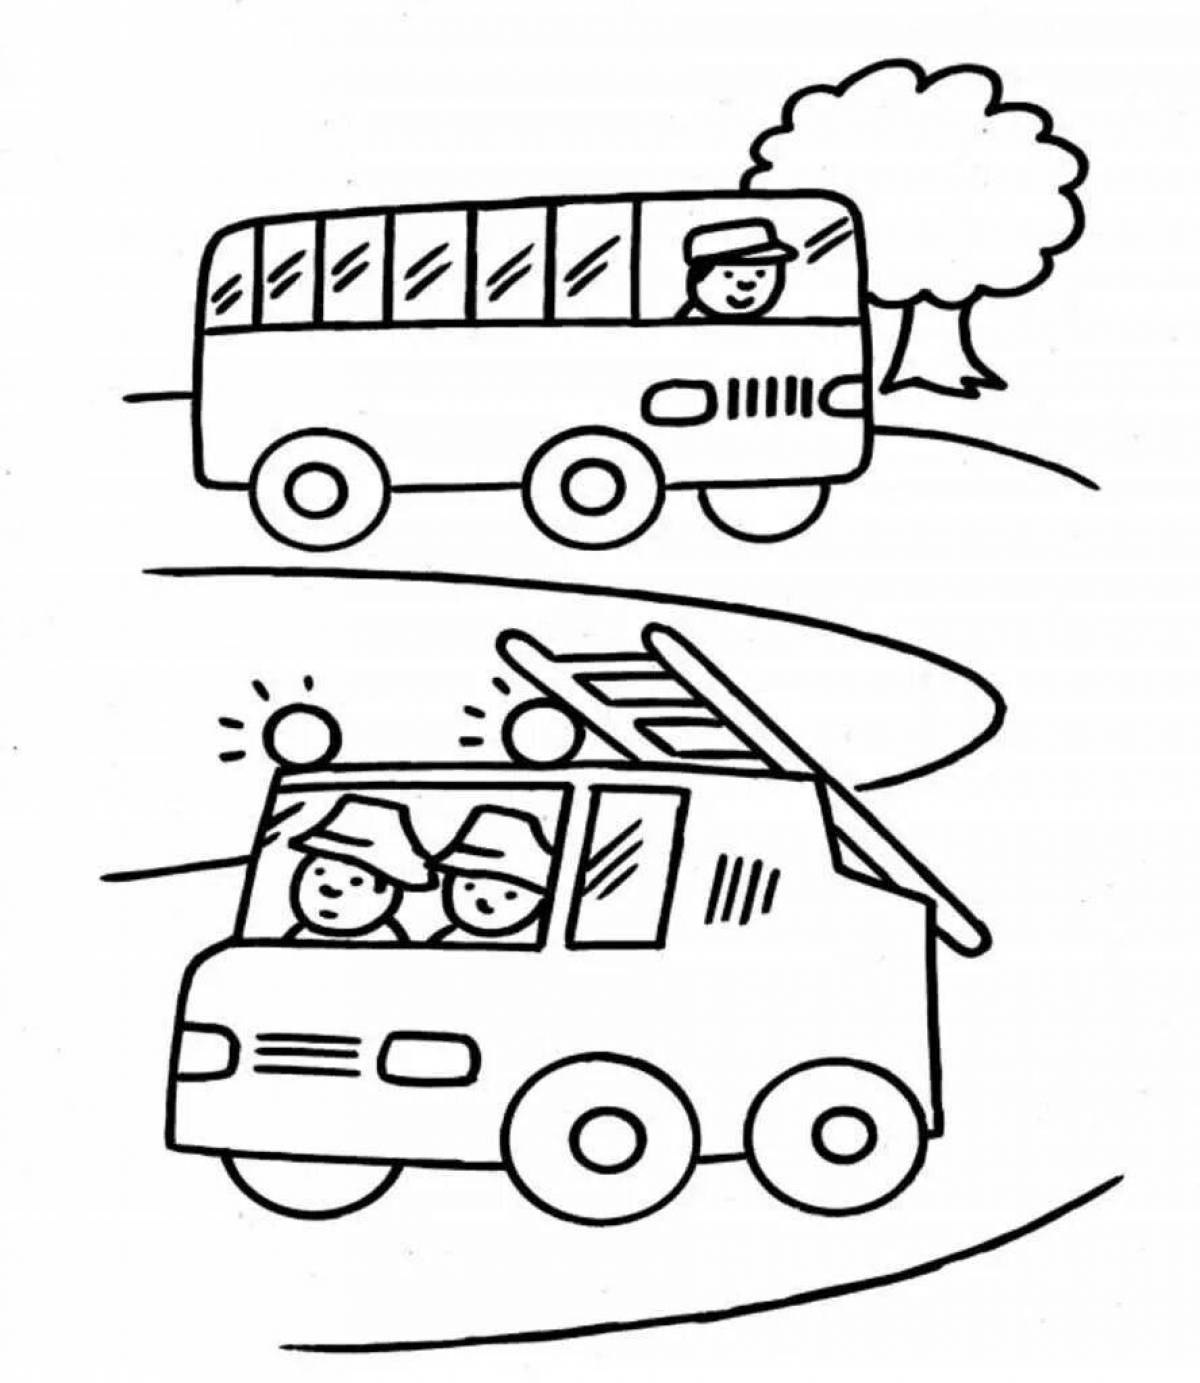 Glorious motor vehicle coloring page